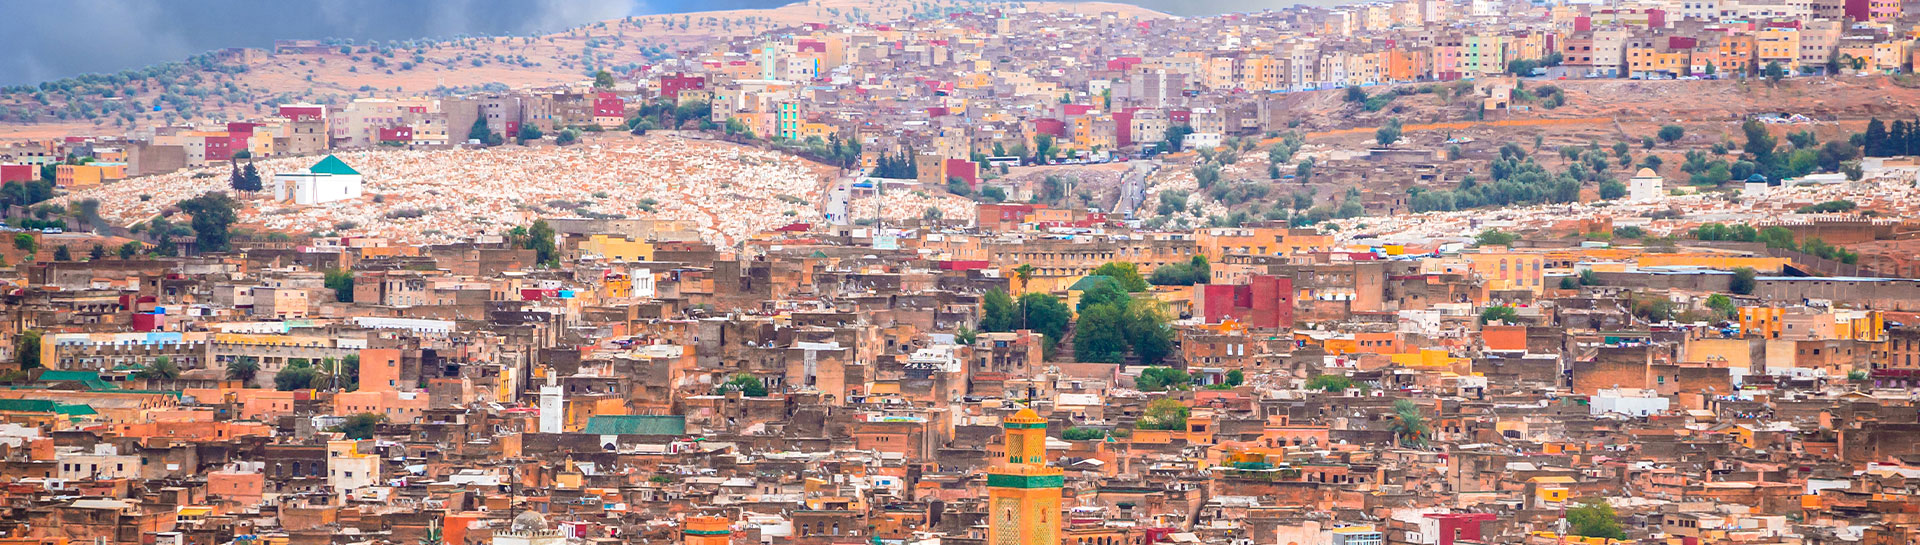 Fes, information about this popular destination in Morocco by the AFRICA MOROCCO LINK company. 